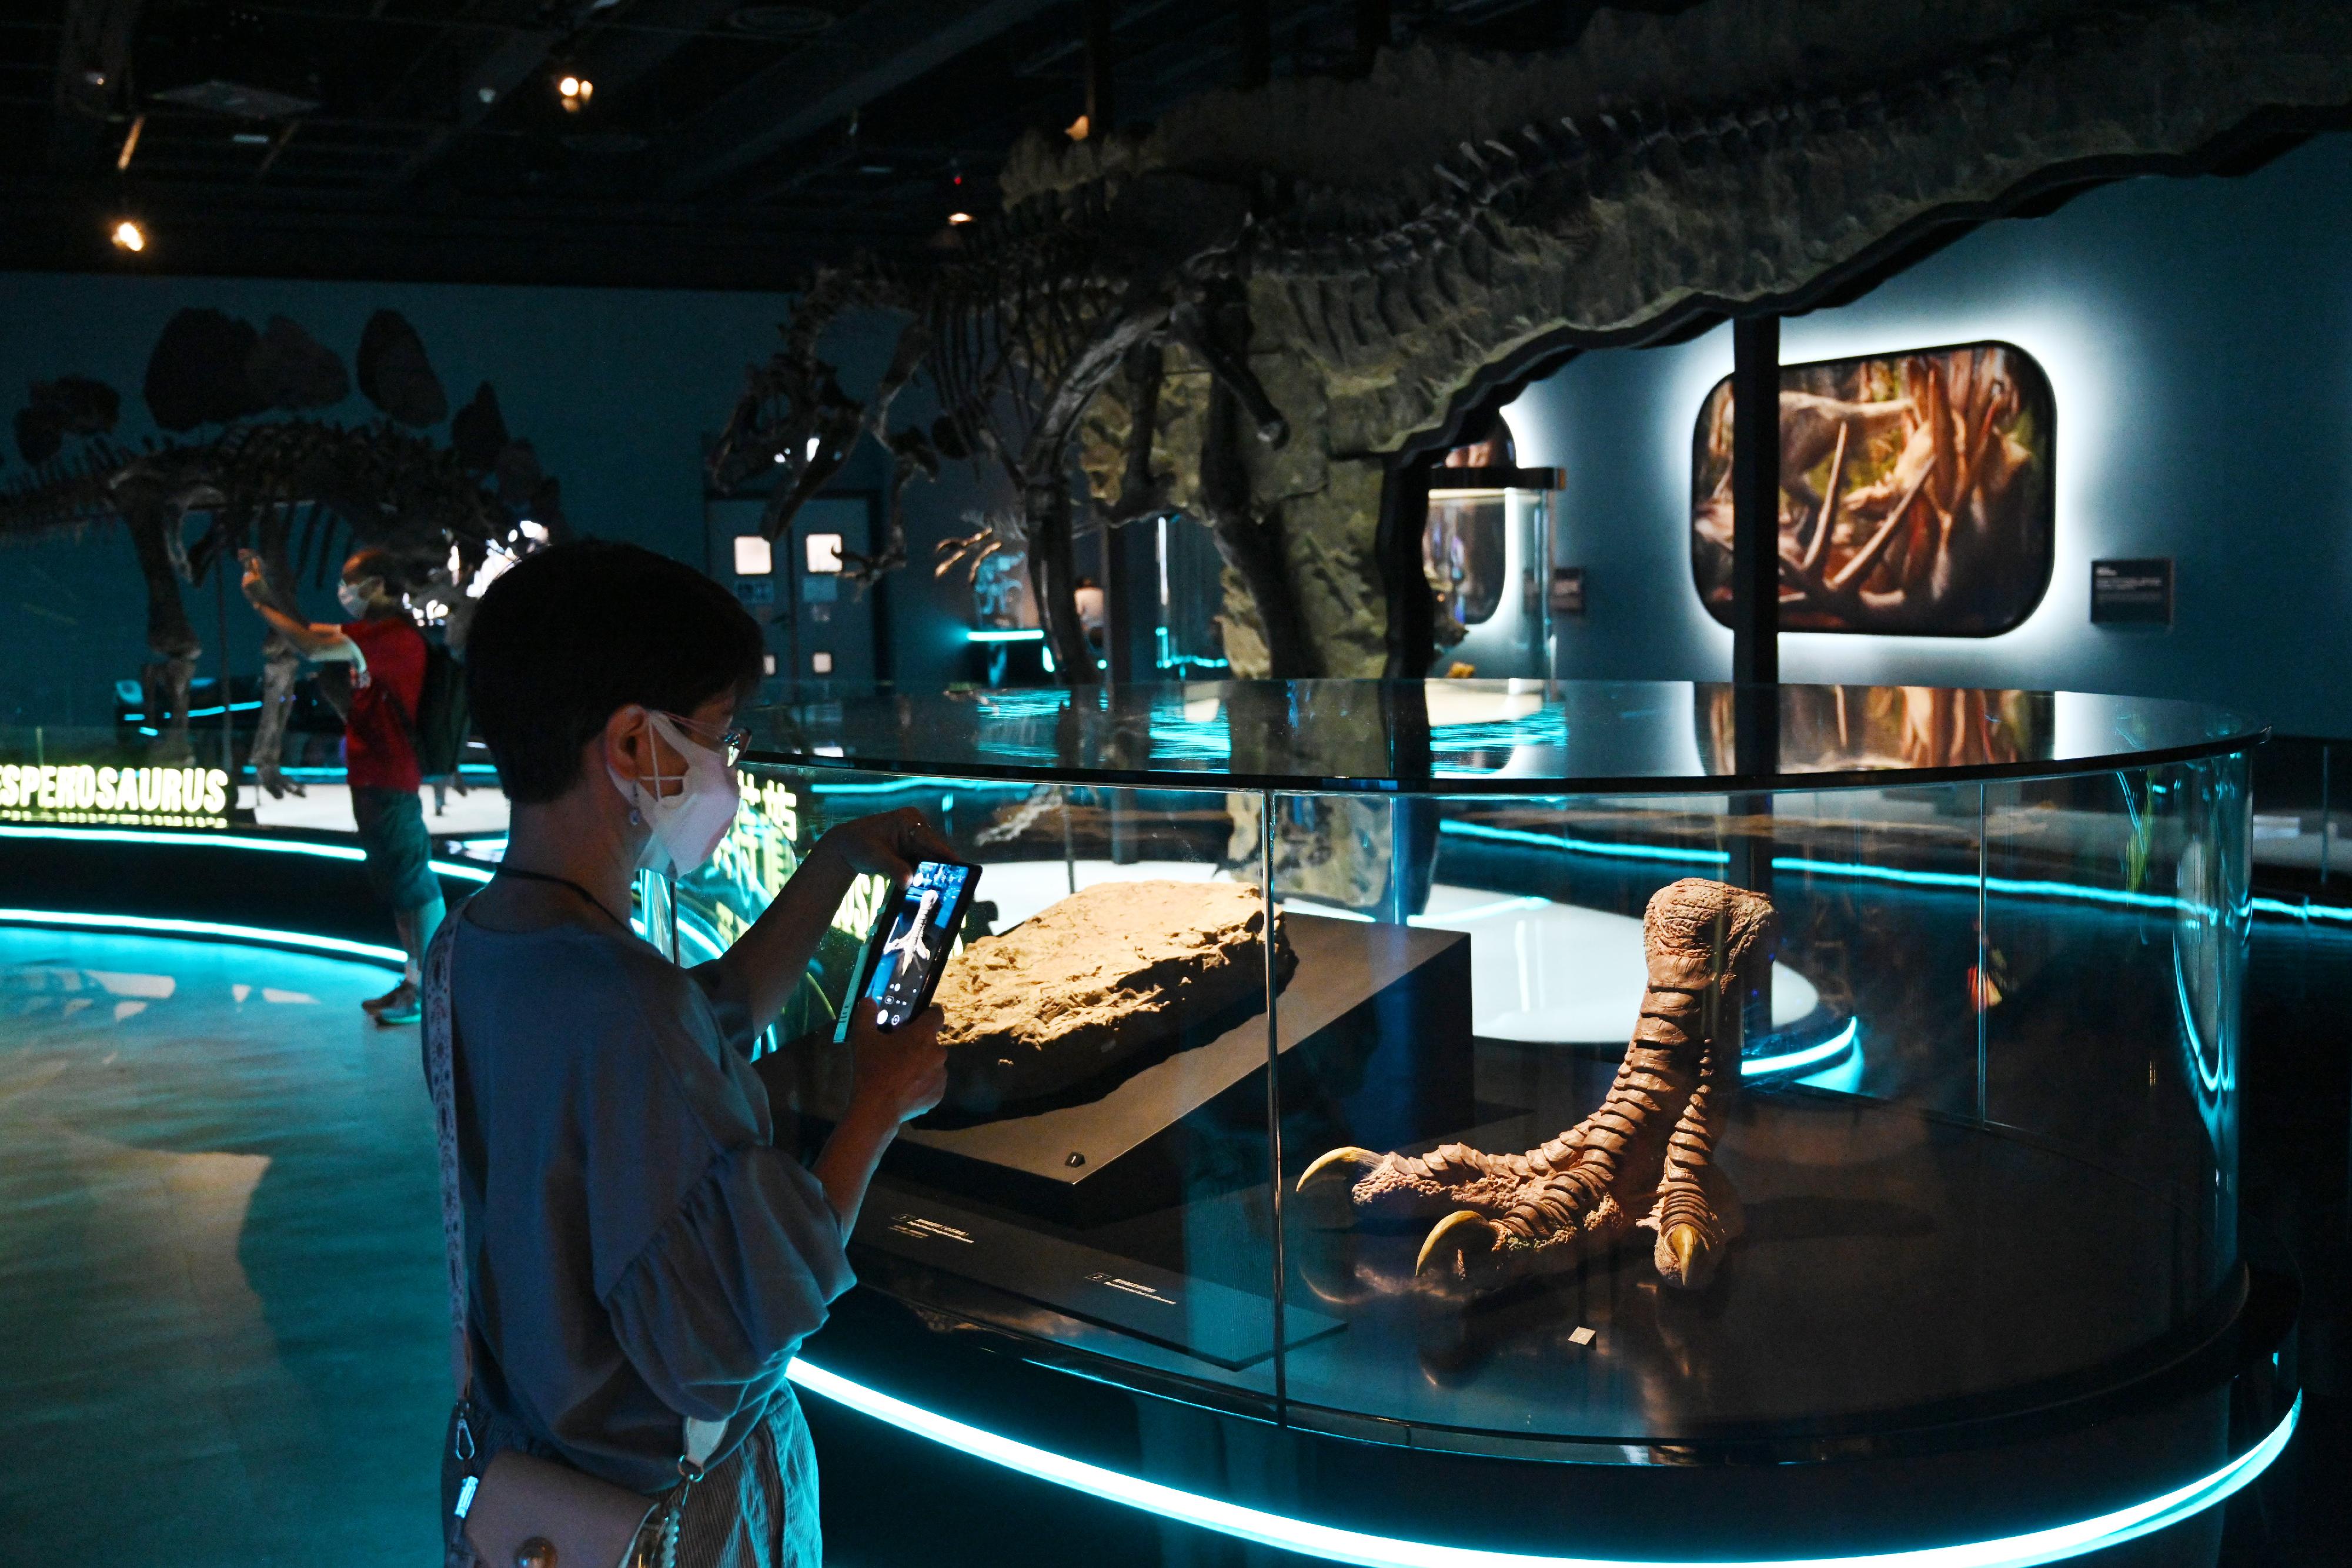 The free large-scale dinosaur exhibition "The Hong Kong Jockey Club Series: The Big Eight - Dinosaur Revelation" organised by the Hong Kong Science Museum has been receiving an overwhelming response from the public since its opening. The museum will extend the exhibition period to February 22, 2023. Picture shows a visitor viewing the reconstructed foot of an allosaurus in the exhibition gallery.